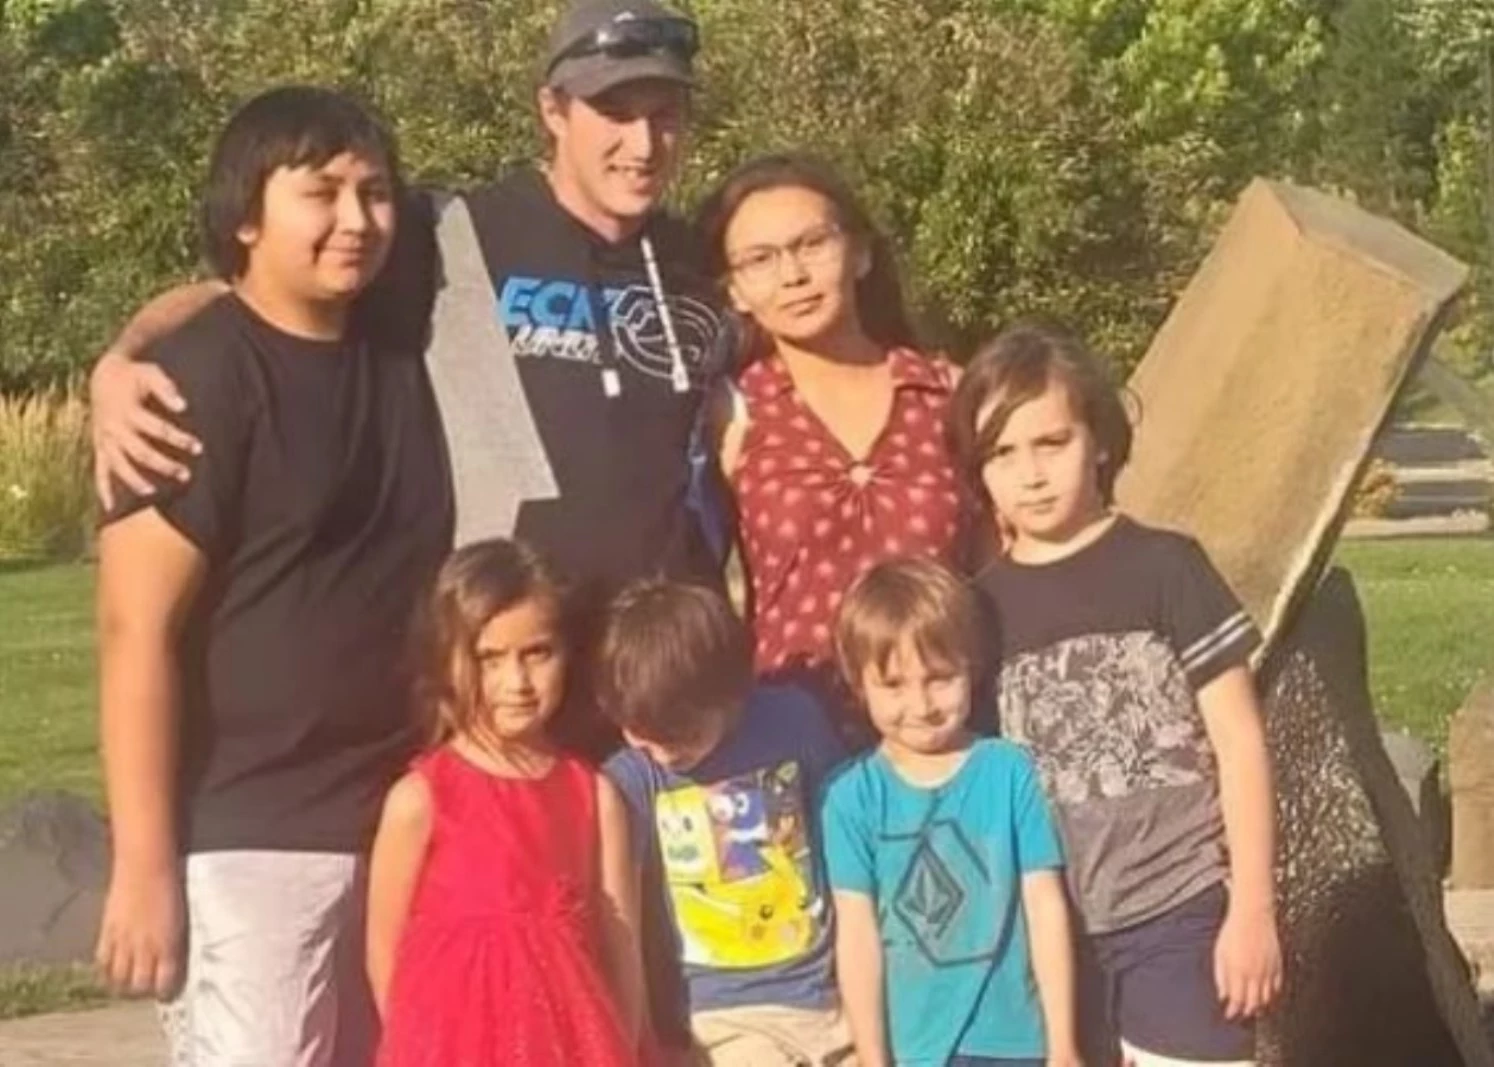 Mother of Five Shot to Death in Altercation Outside a Montana